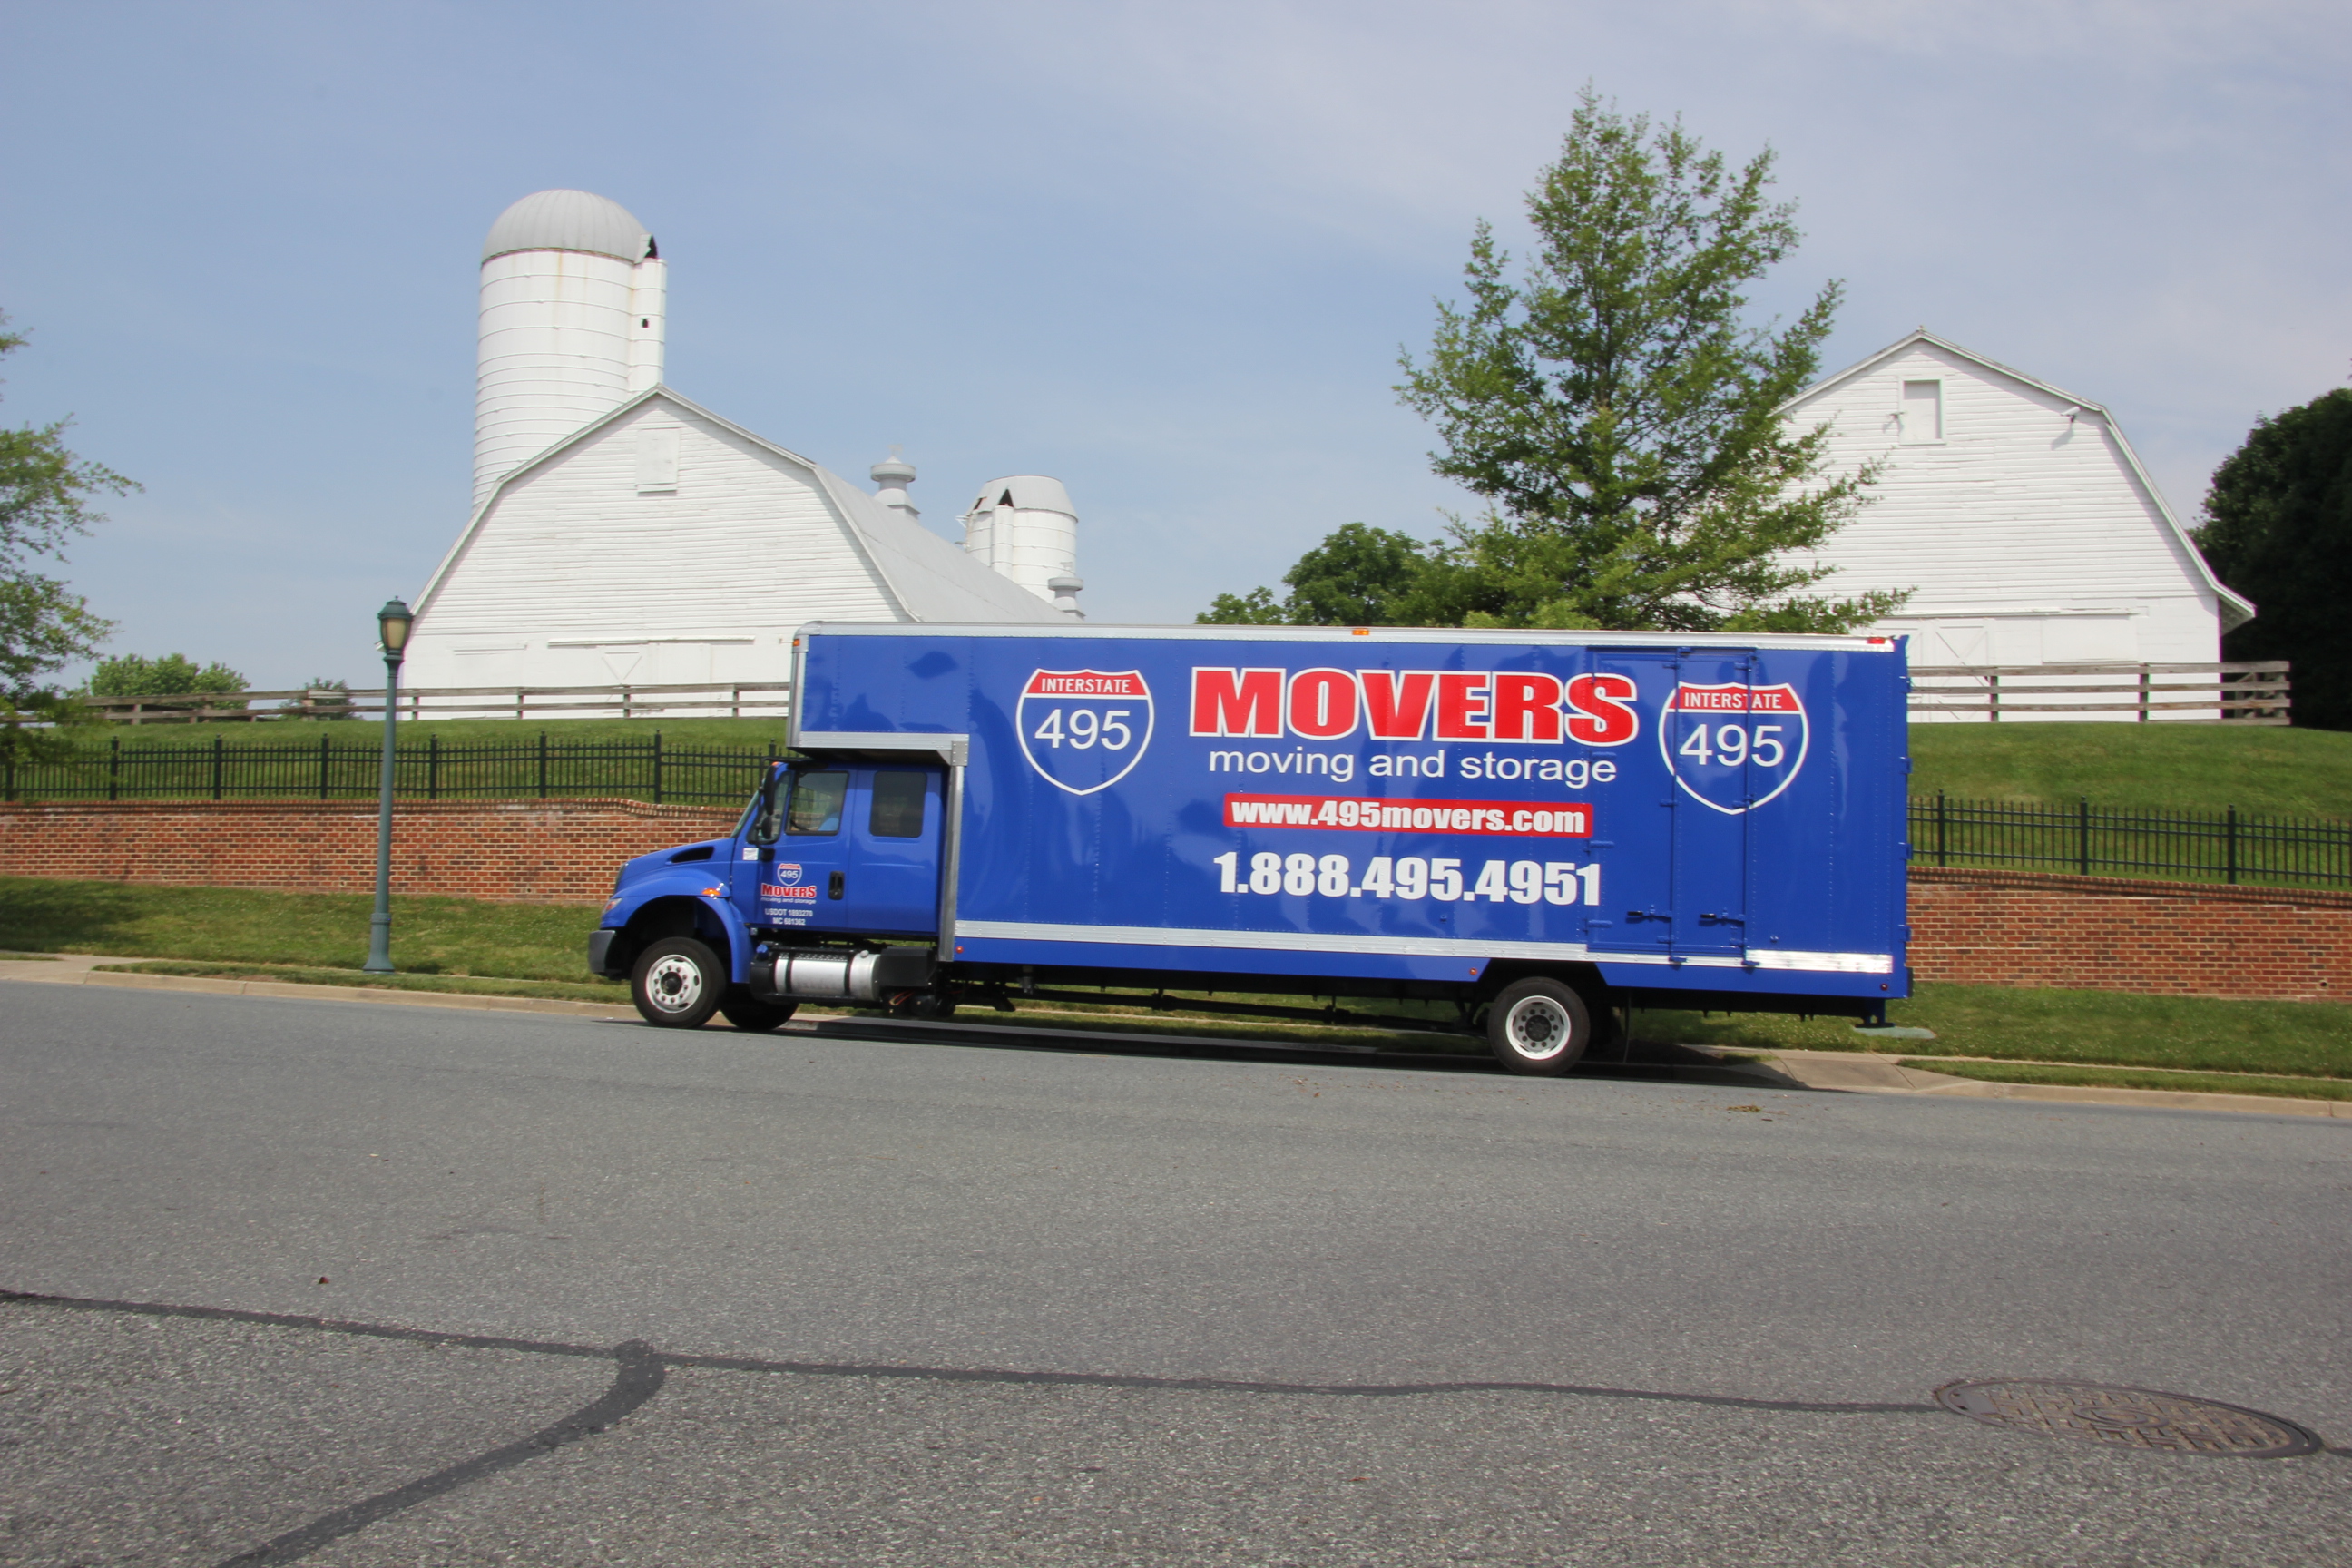 495 Movers Inc Rockville (855)300-7509